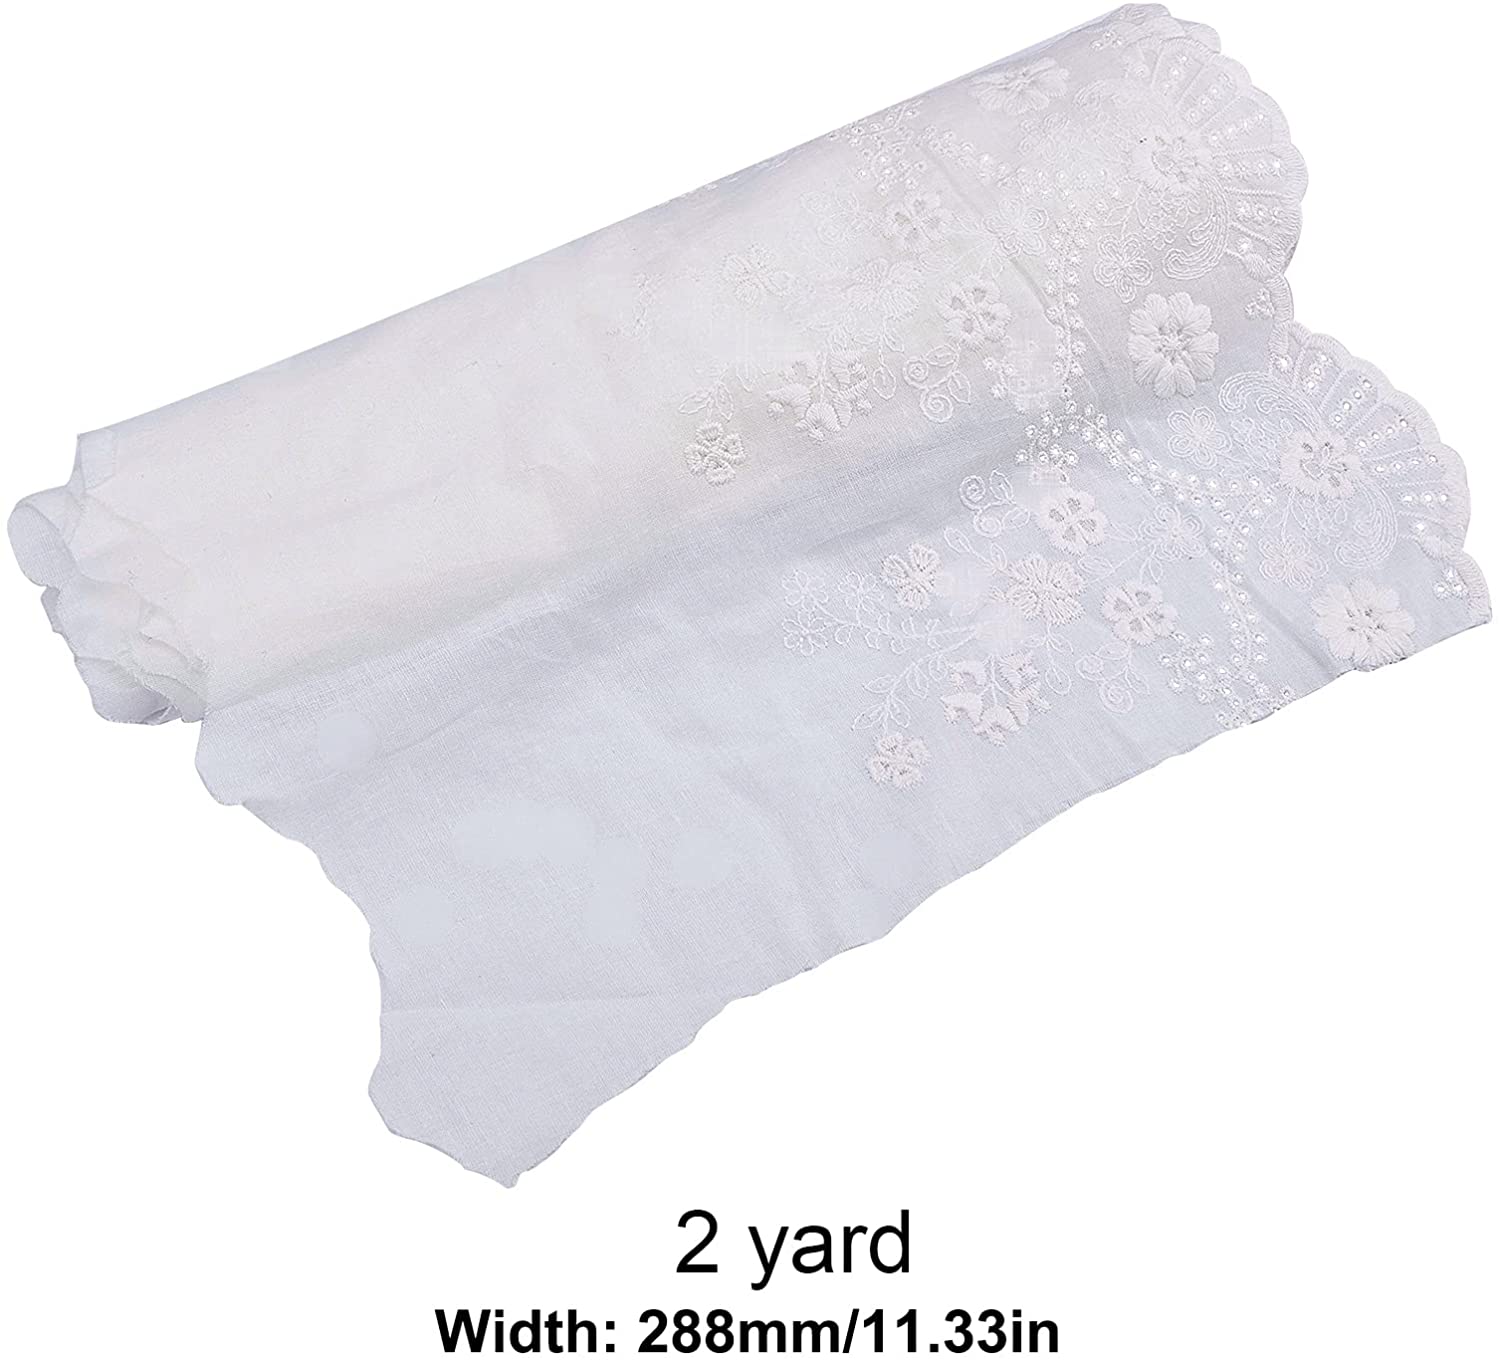 2 Yards Lace Roll White Cotton Lace Trim Fabric 11.33 Wide for Scalloped Edge Decorations for Dress Tablecloth Curtain Hair Band